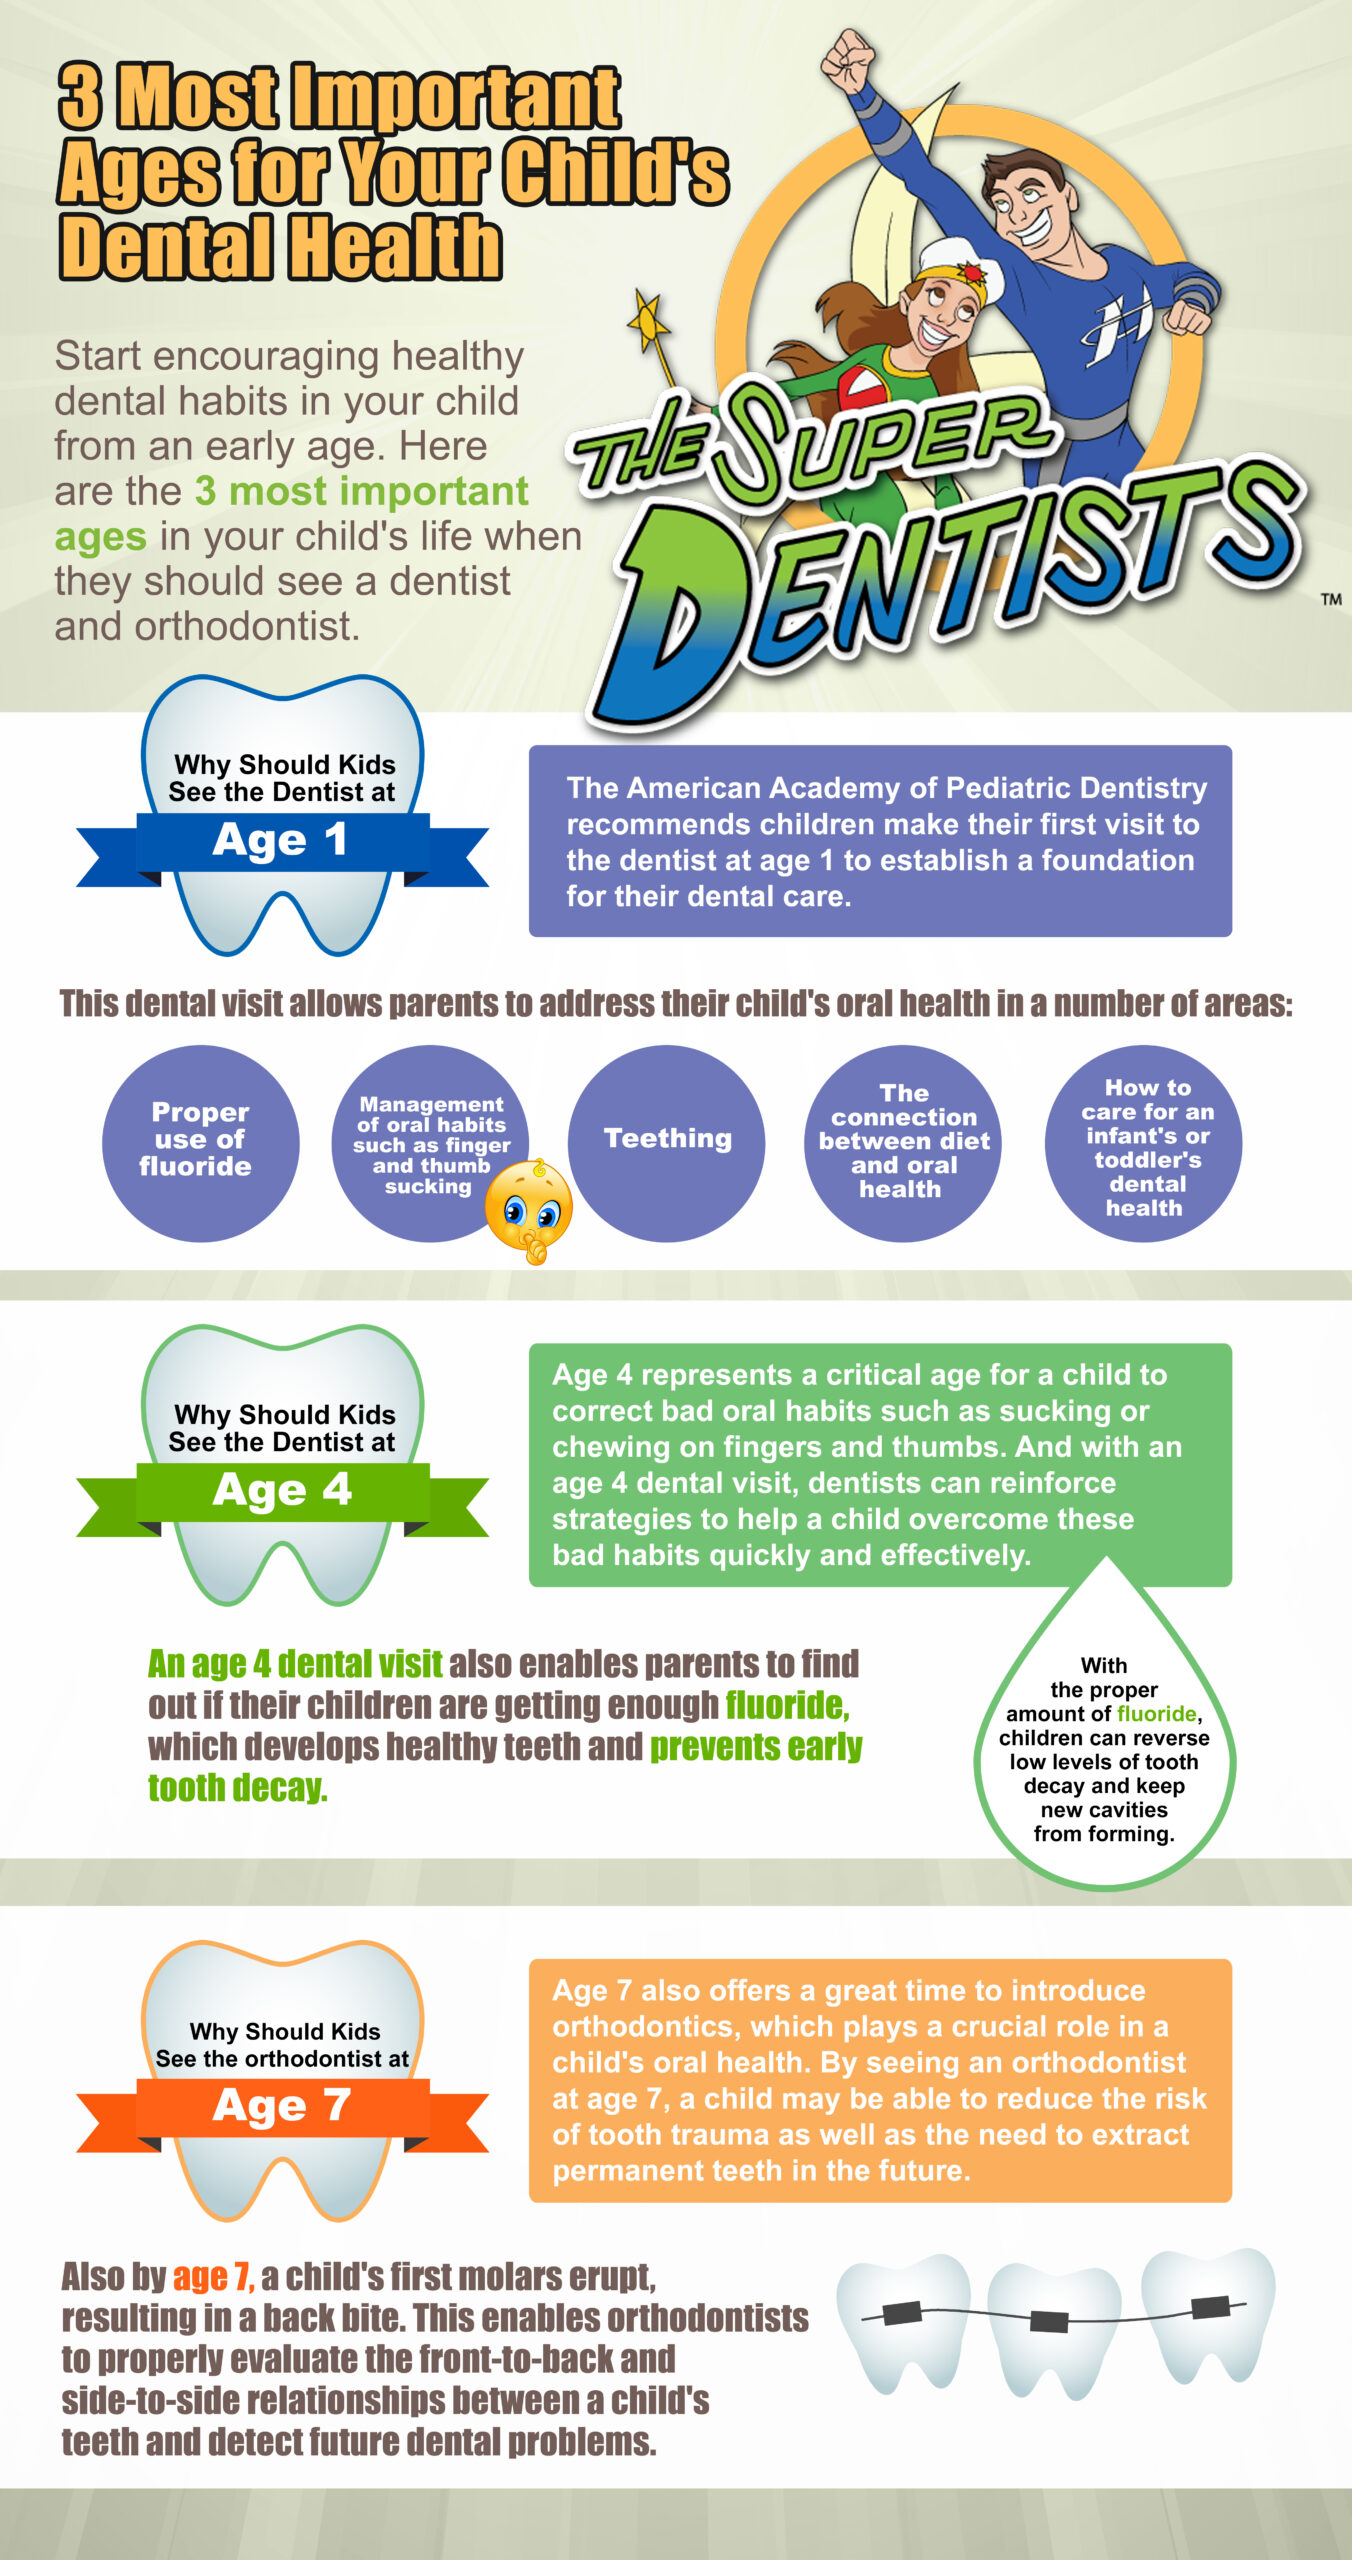 When Should Your Child First Visit the Dentist?